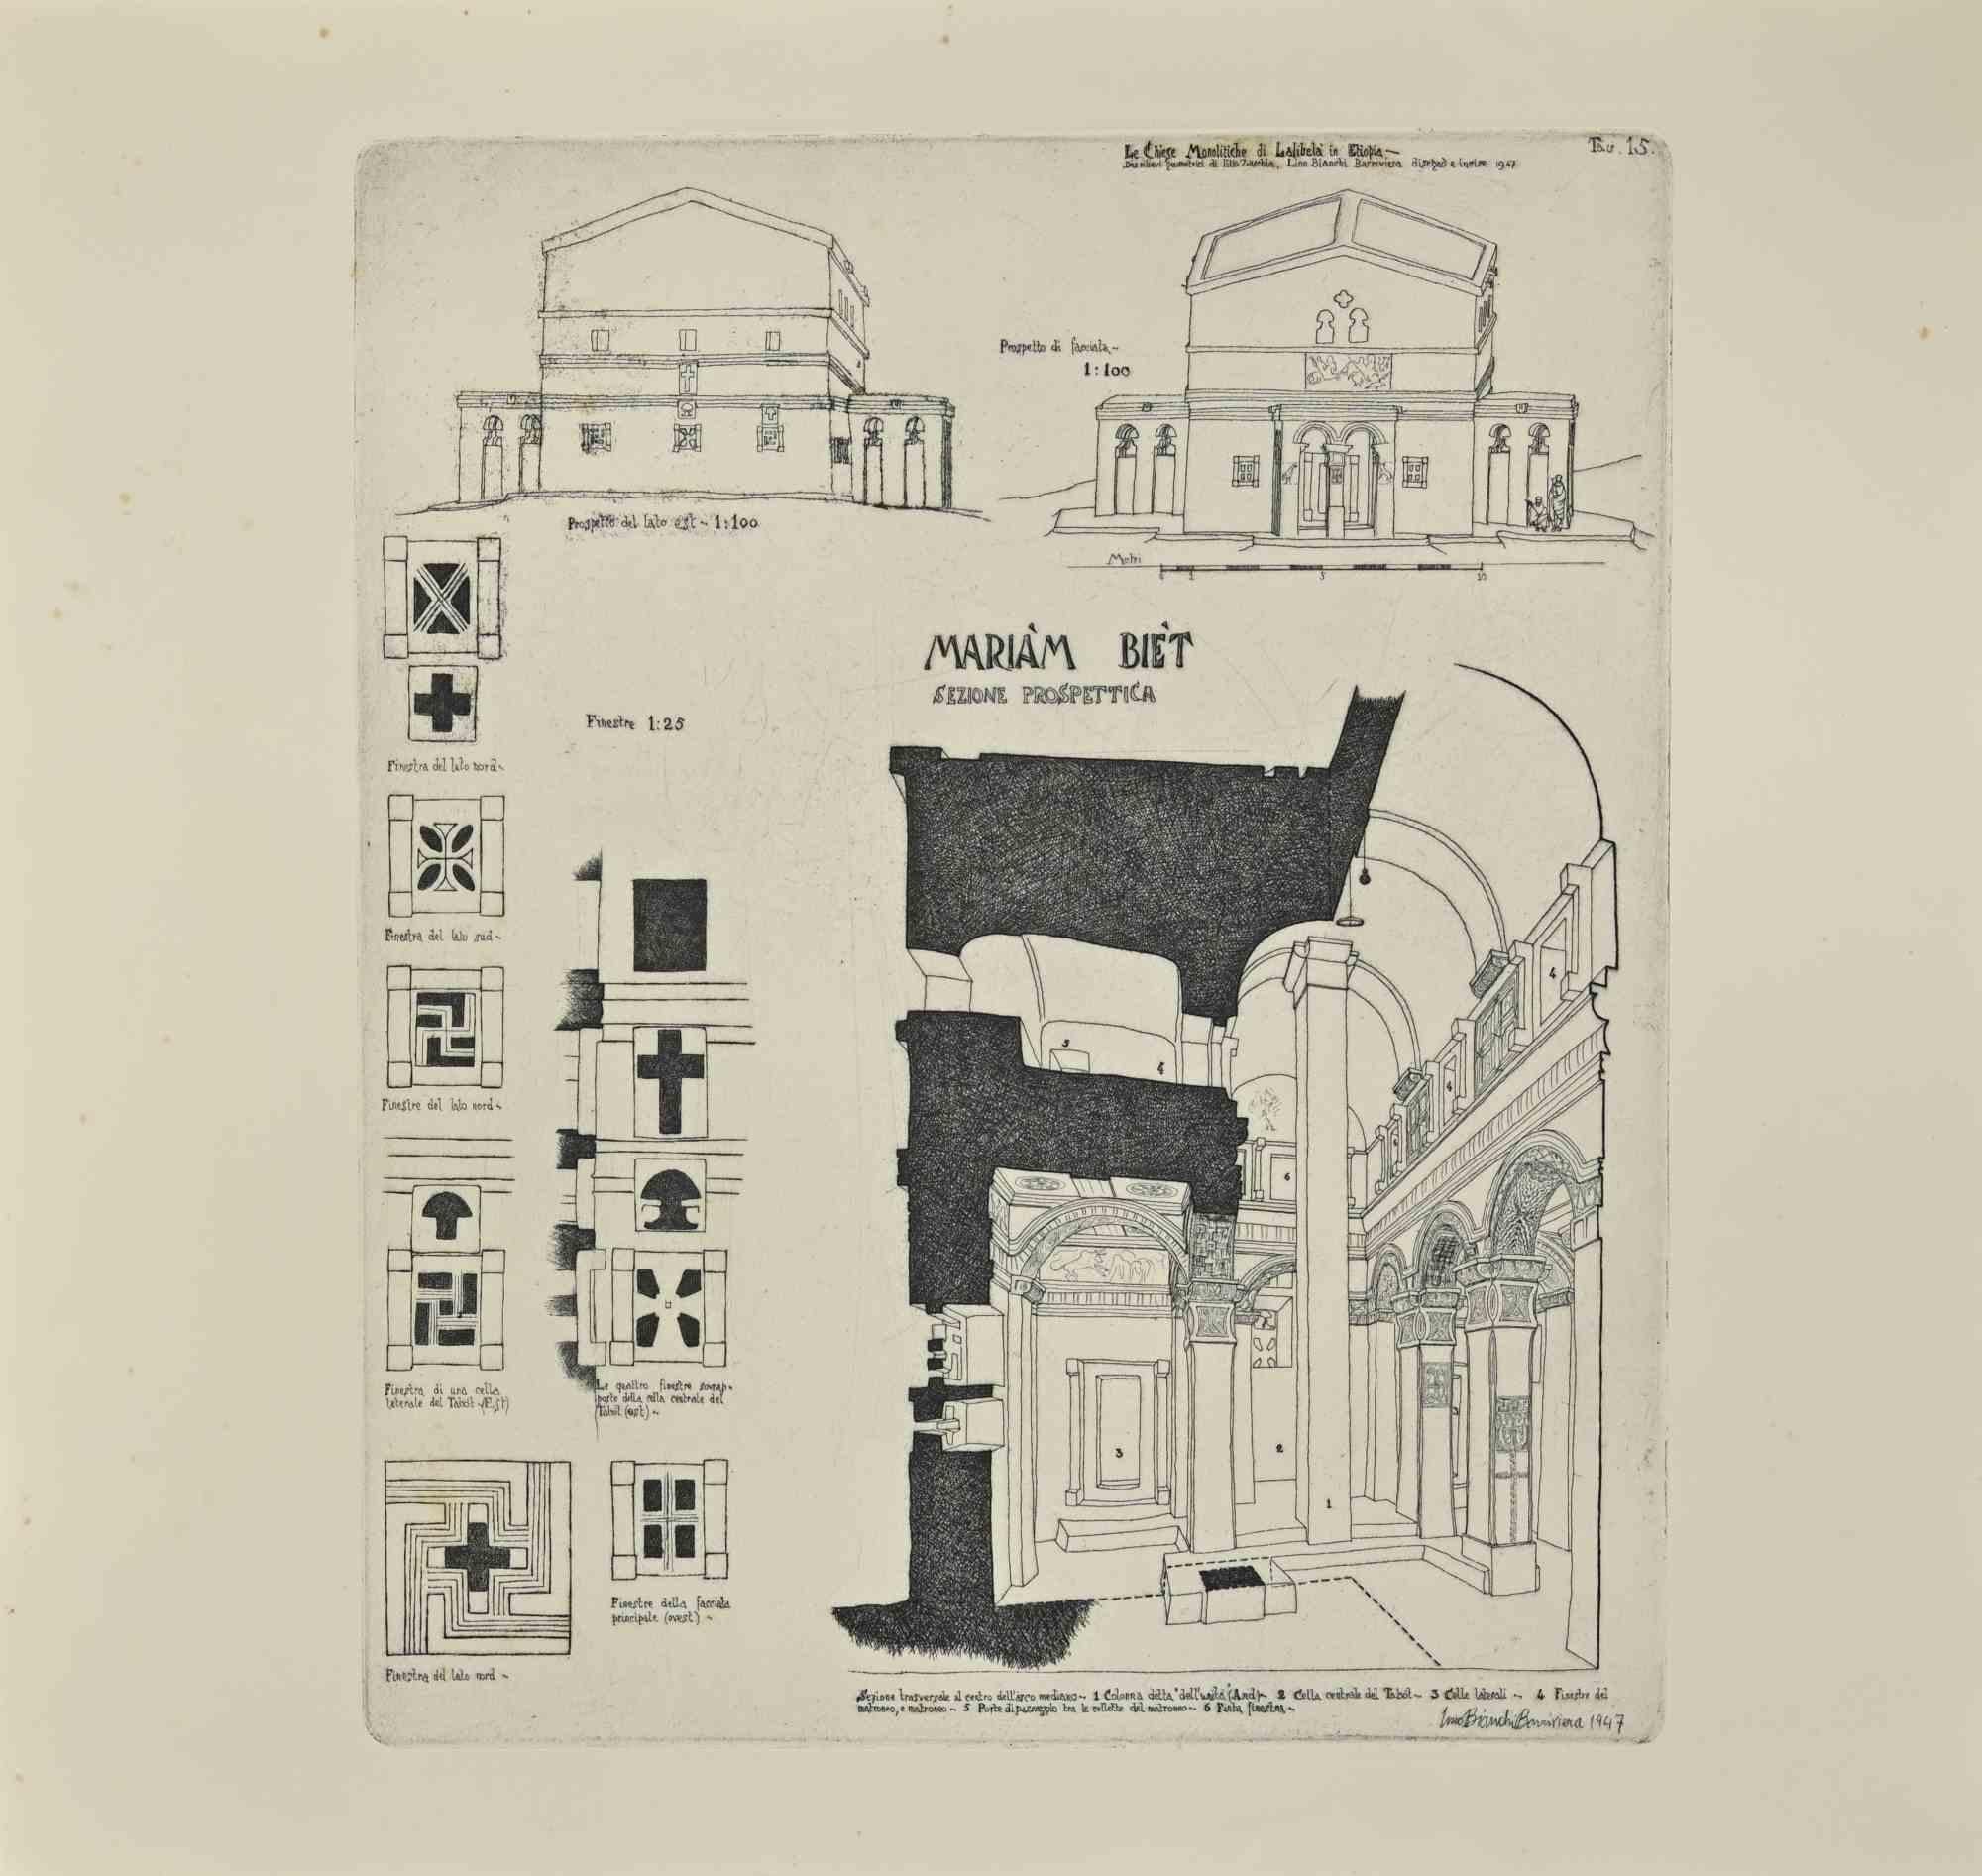 Biet Mariam: plans and perspective details is a modern artwork realized by Lino Bianchi Barriviera in 1947.

Black and white etching.

Signed and dated on plate.

Plate n.15 (as reported on the higher margin).

The artwork is from the series "The